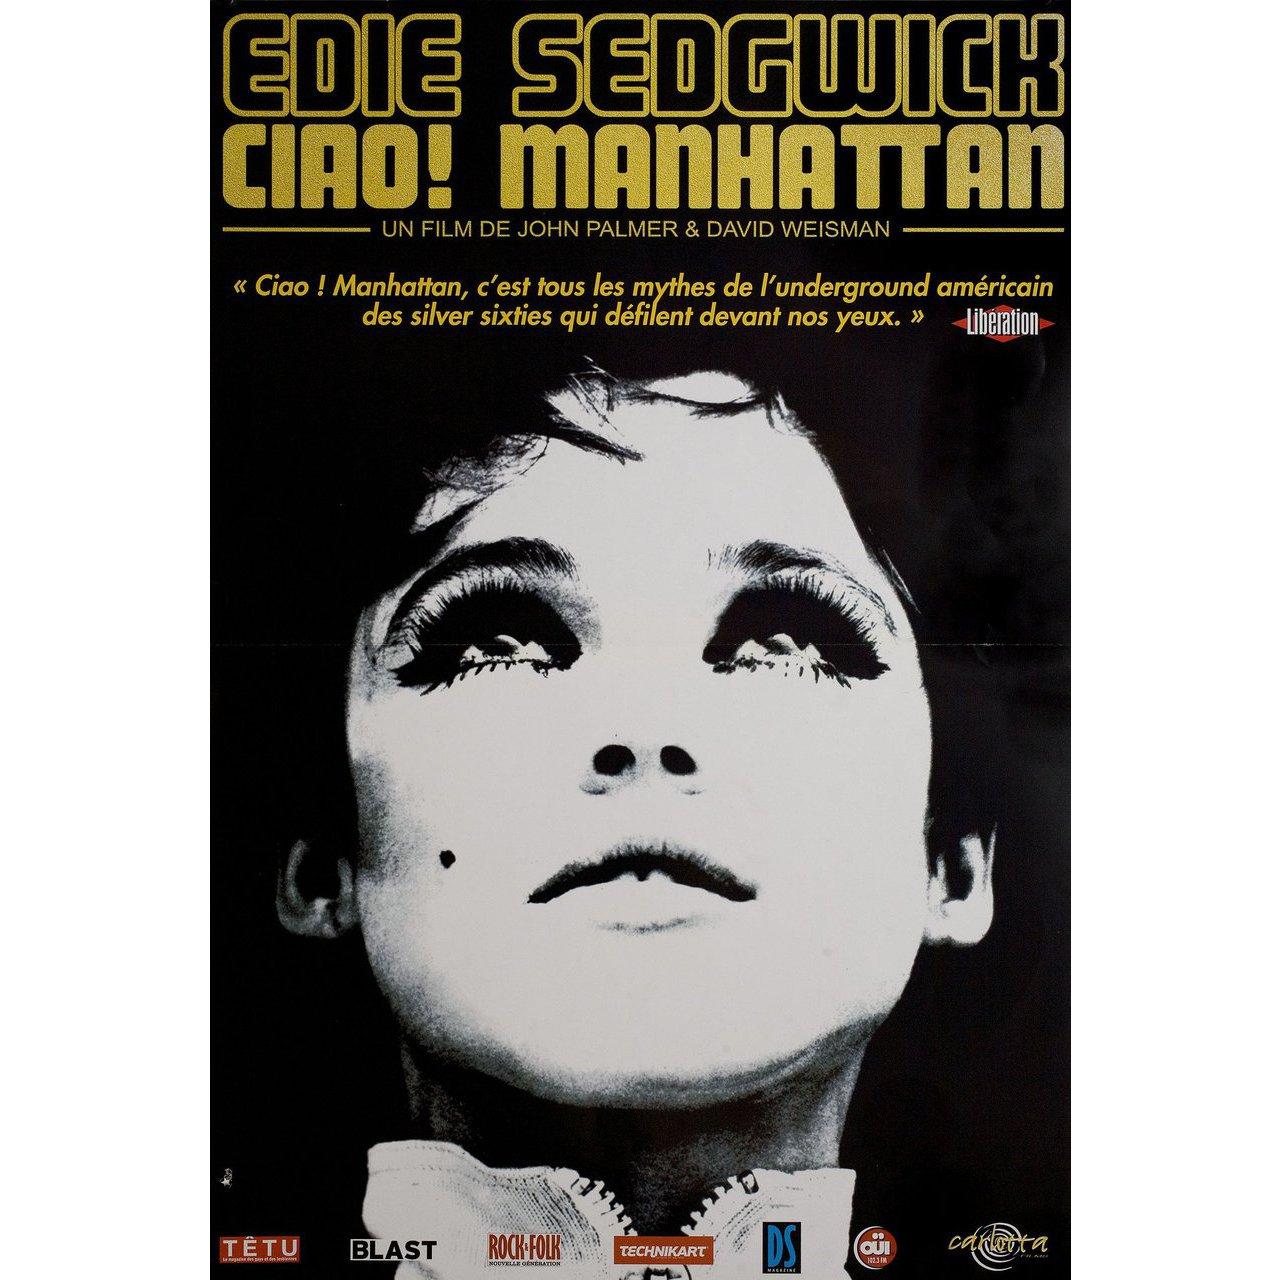 Original 1990s re-release French petite poster for. Very good-fine condition, folded. Many original posters were issued folded or were subsequently folded. Please note: the size is stated in inches and the actual size can vary by an inch or